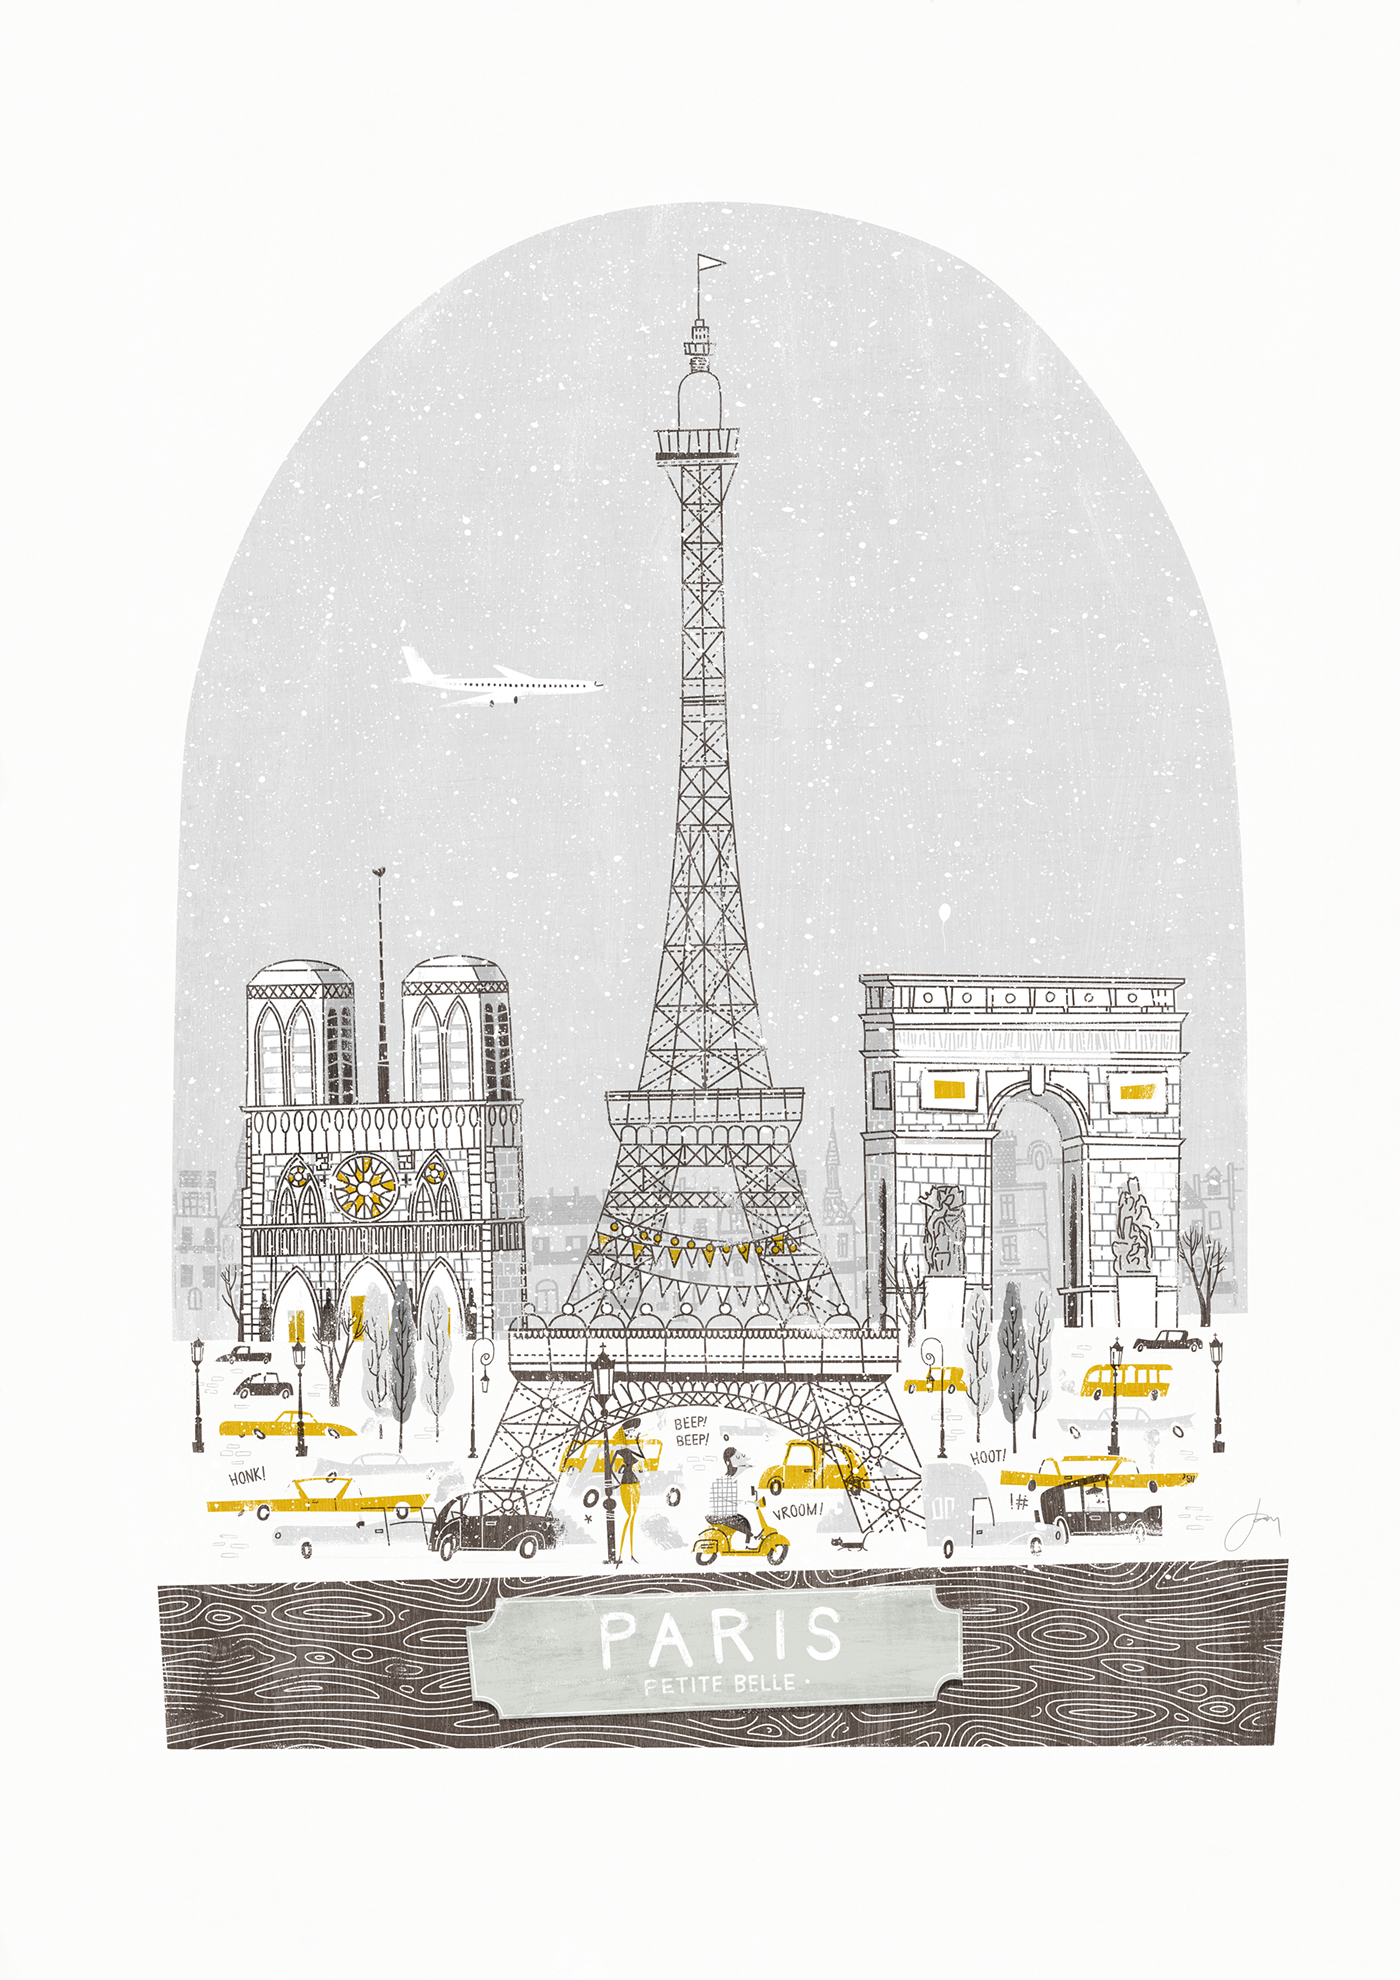 Illustrated poster featuring the French capital Paris and Parisian lifestyle in 1950s style art.